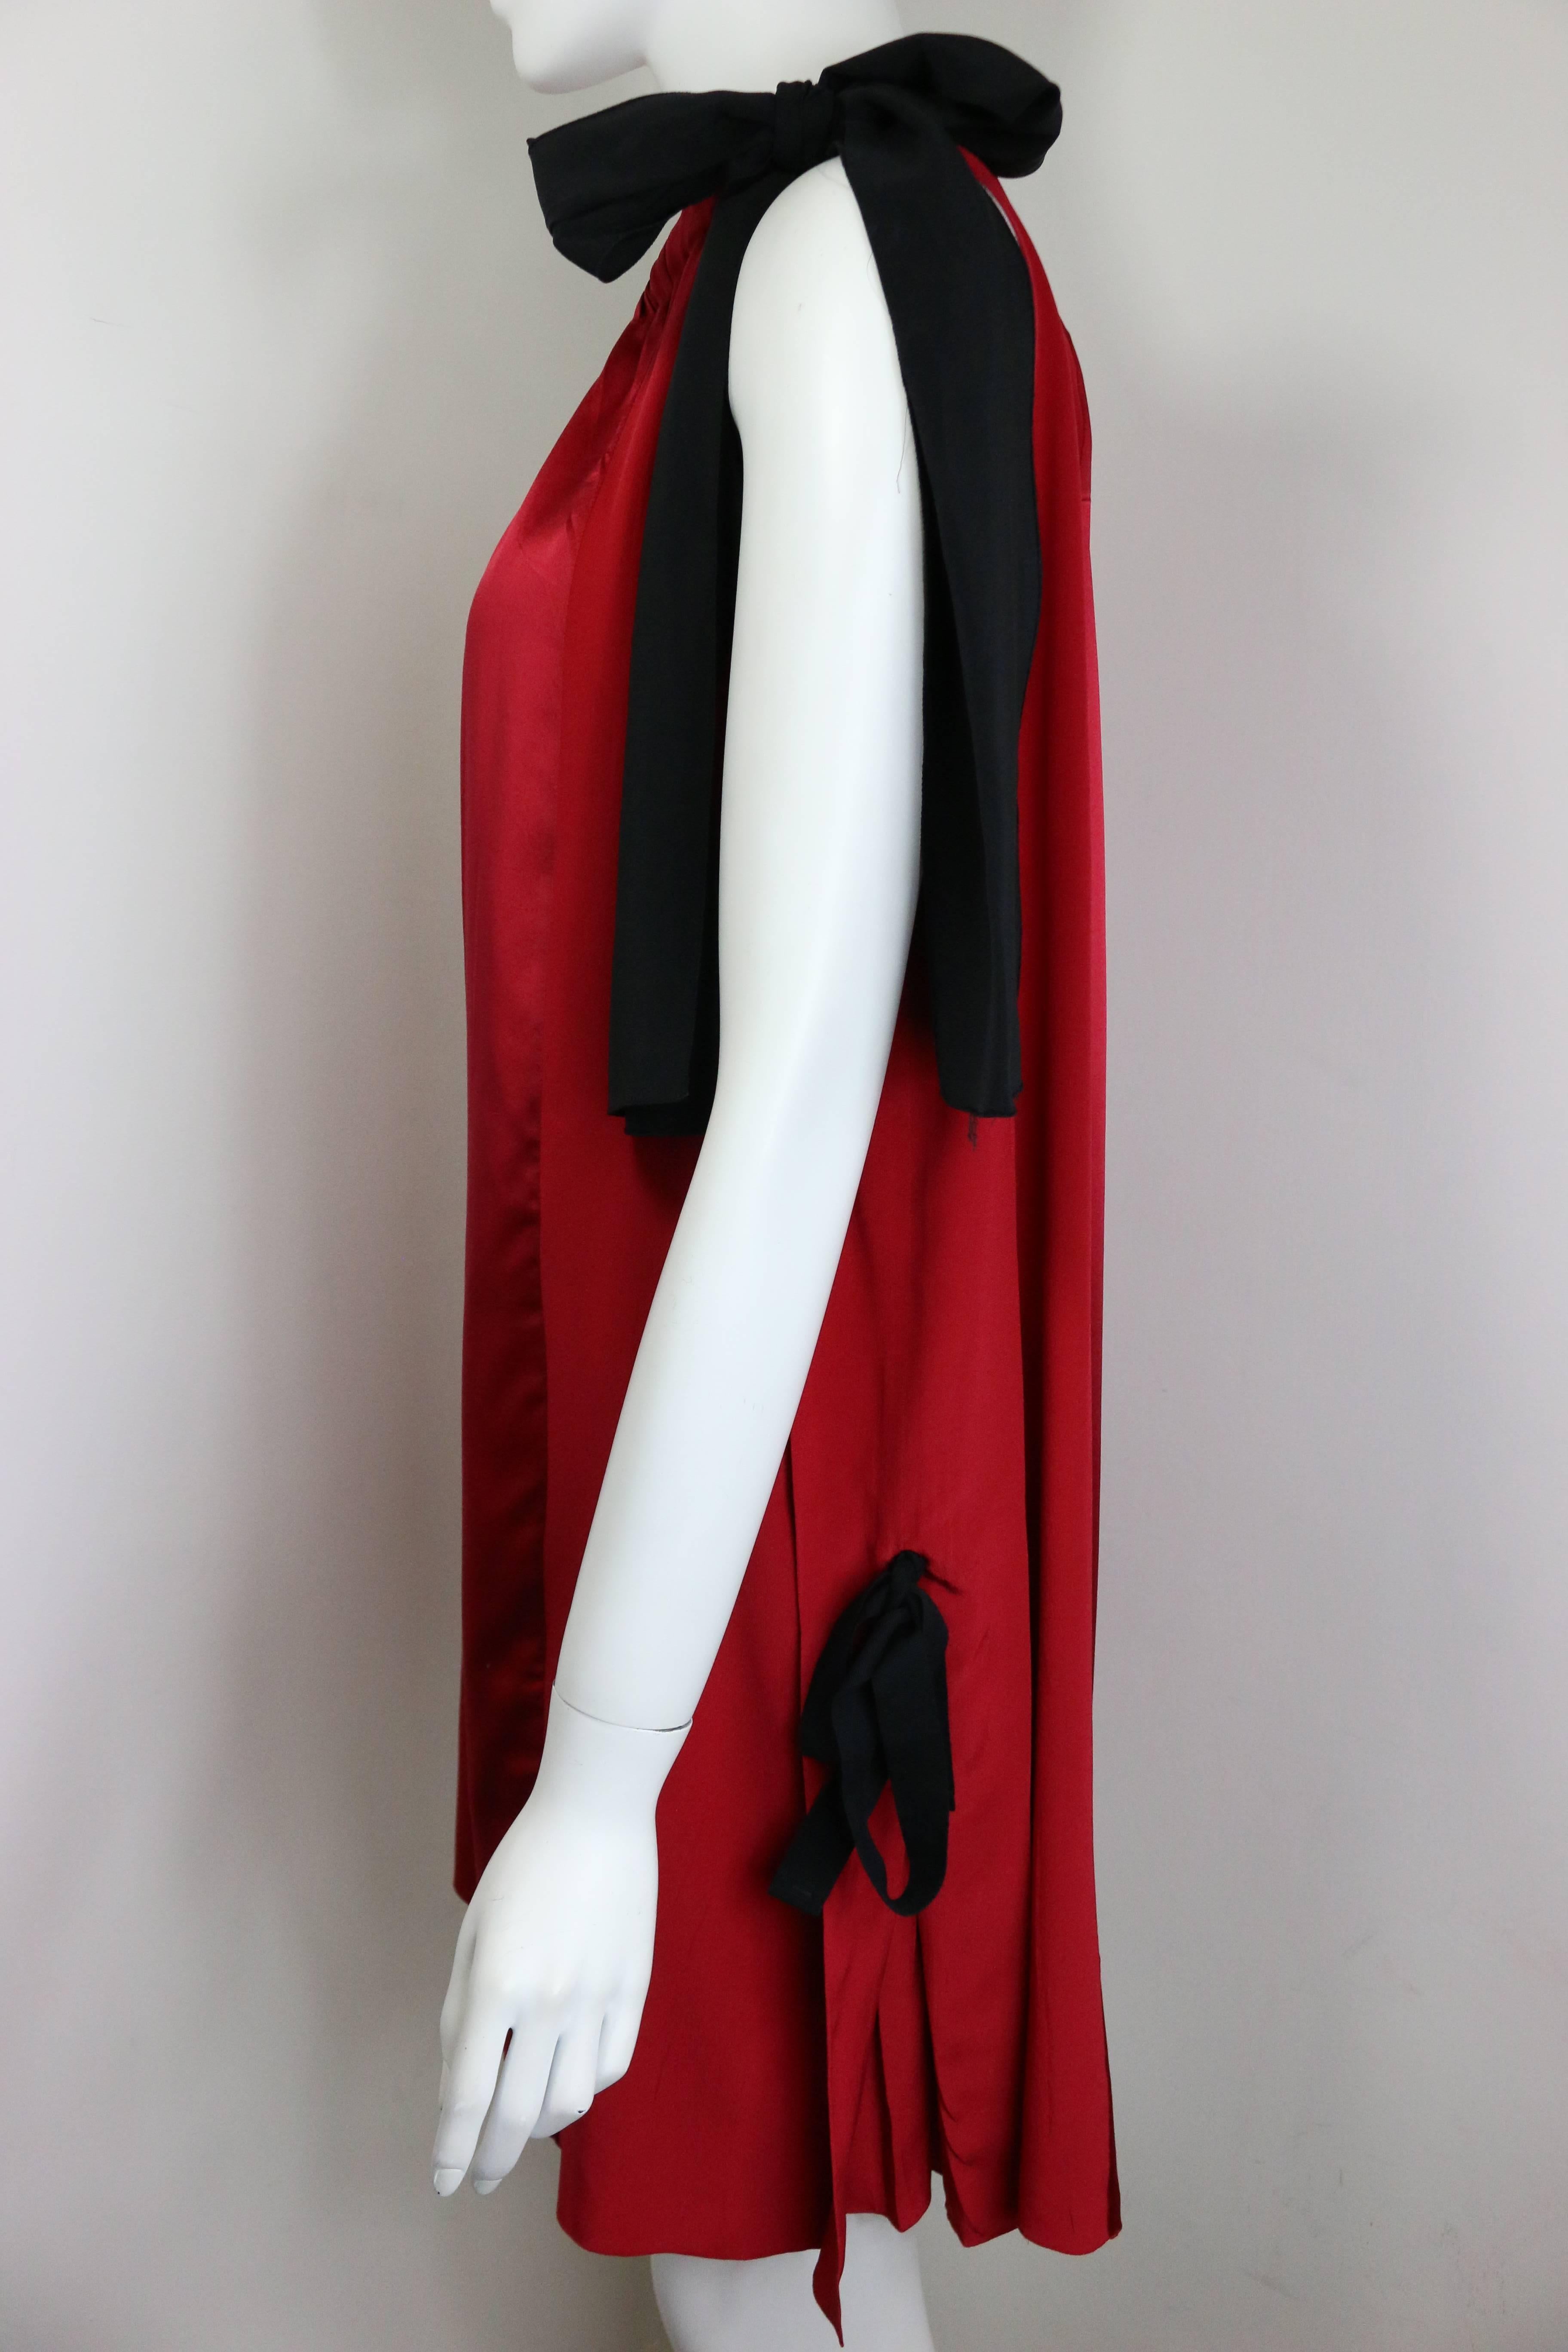 - Prada Burgundy panel satin and silk sleeveless cocktail dress. 

- Featuring two black tied ribbons on the side of the dress. 

- Size 42 IT

- 100 % Silk. 
